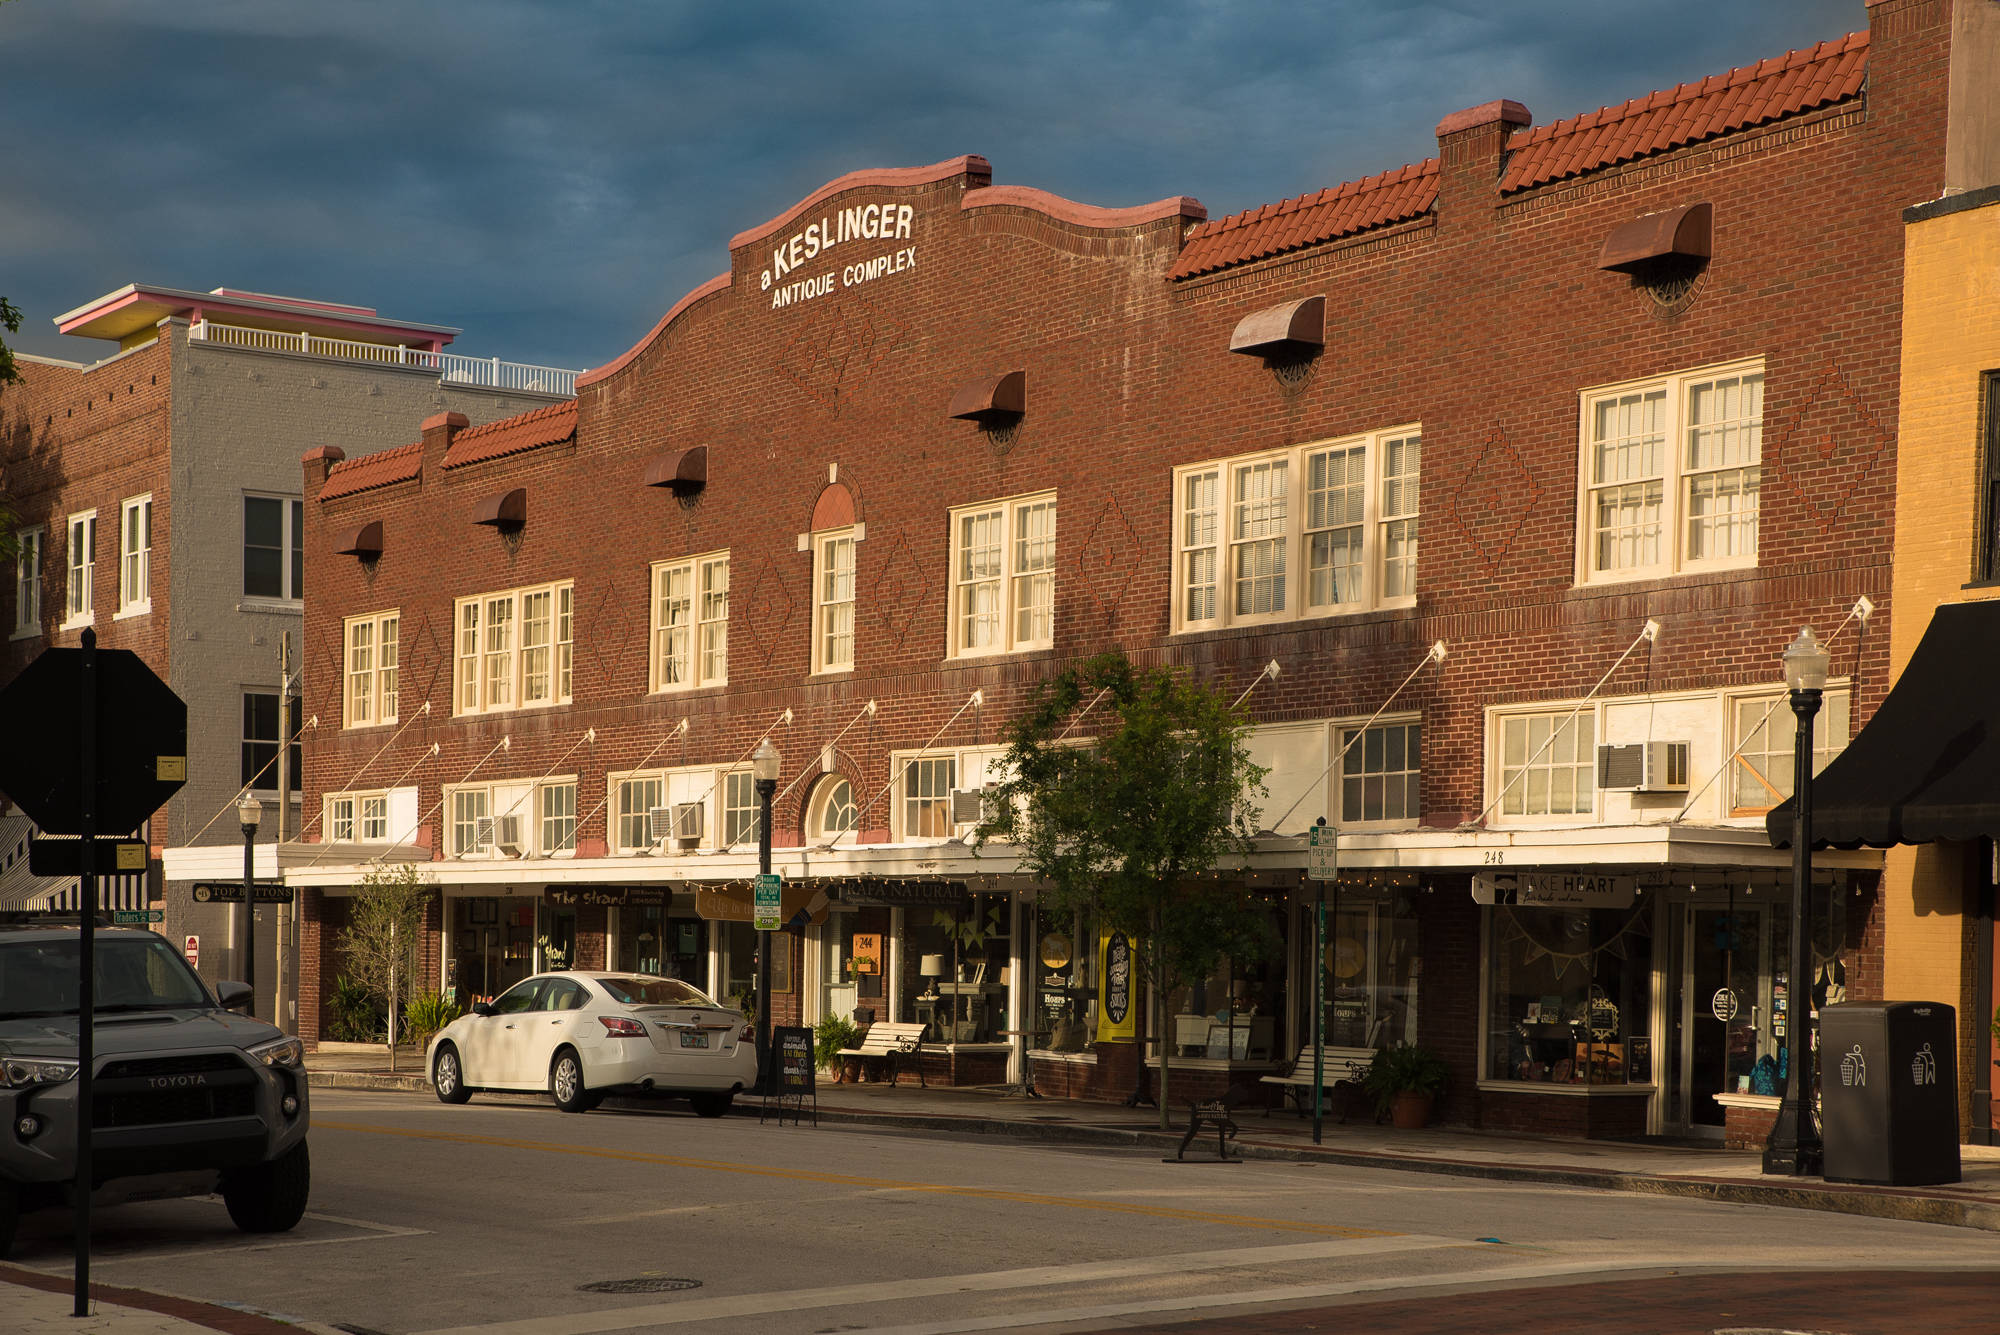 The Keslinger Antiques Complex on N. Kentucky Avenue has housed a number of businesses over the years before becoming part of the Lakeland Antiques District. It was built in 1925 and renovated in 1987.